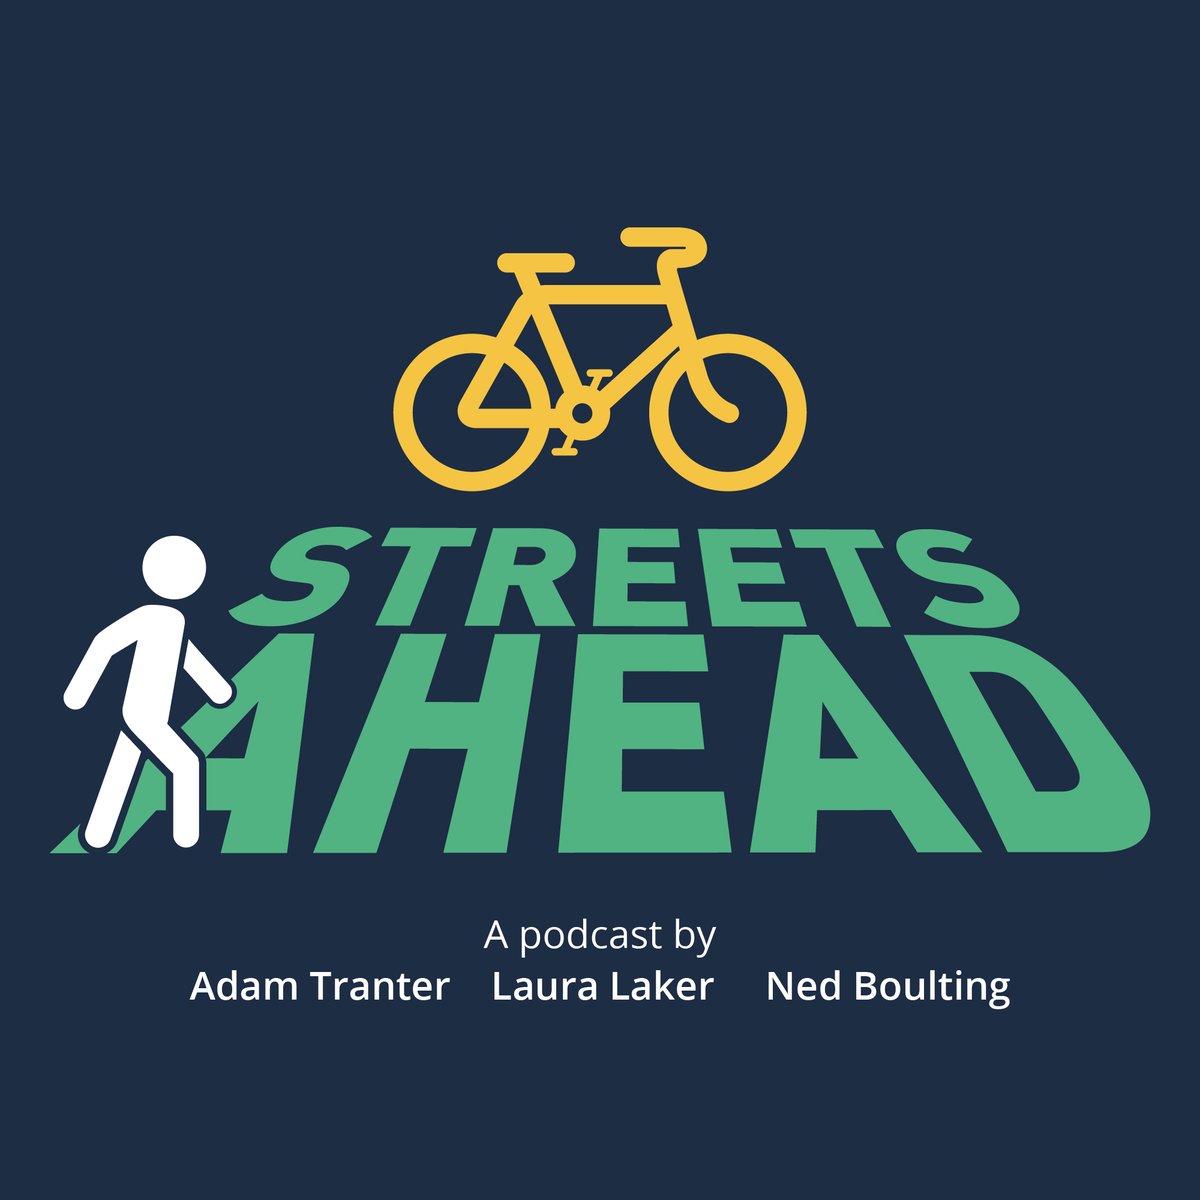 🚨🚲🚶‍♀️🏙 We’re live! Listen to the first episode of Streets Ahead, a new podcast on active travel, cities and liveable streets from @adamtranter, @laura_laker and Ned Boulting.

🎧 streetsaheadpod.com
Search “Streets Ahead” wherever you listen to podcasts and hit “Subscribe”!